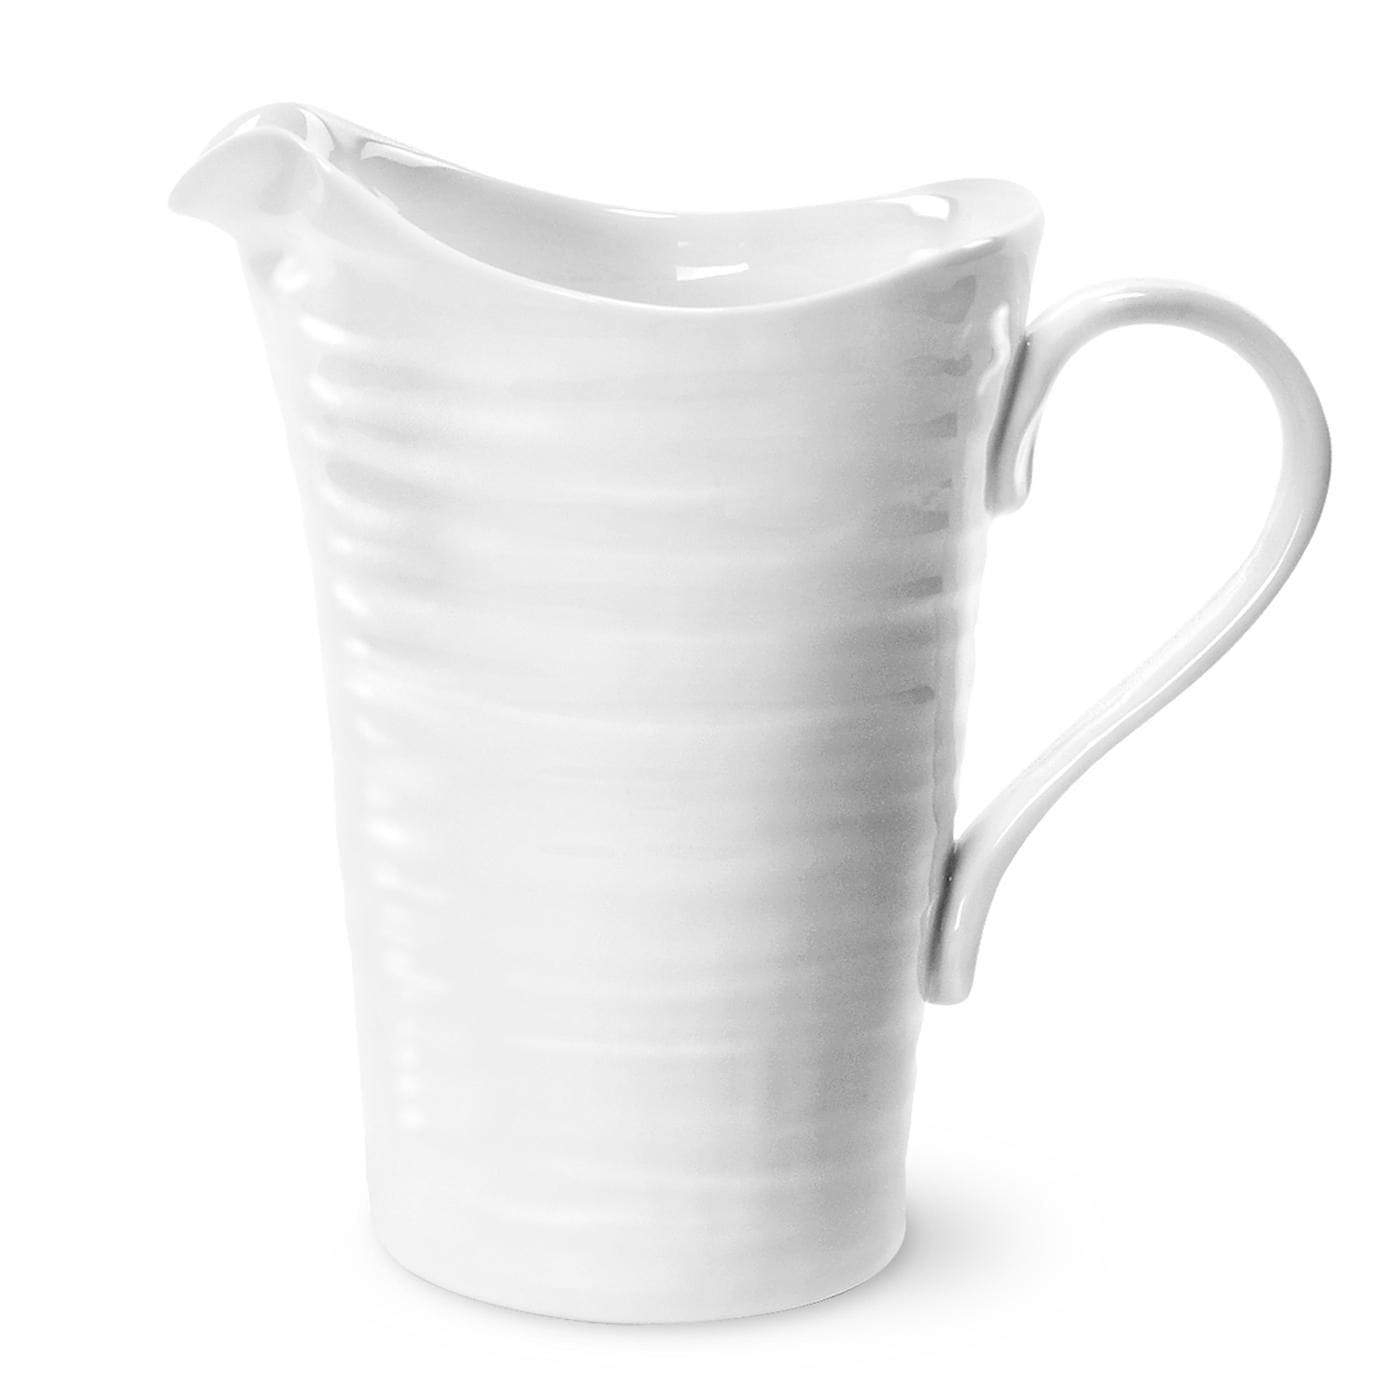 Sophie Conran for Portmeirion White Large Pitcher